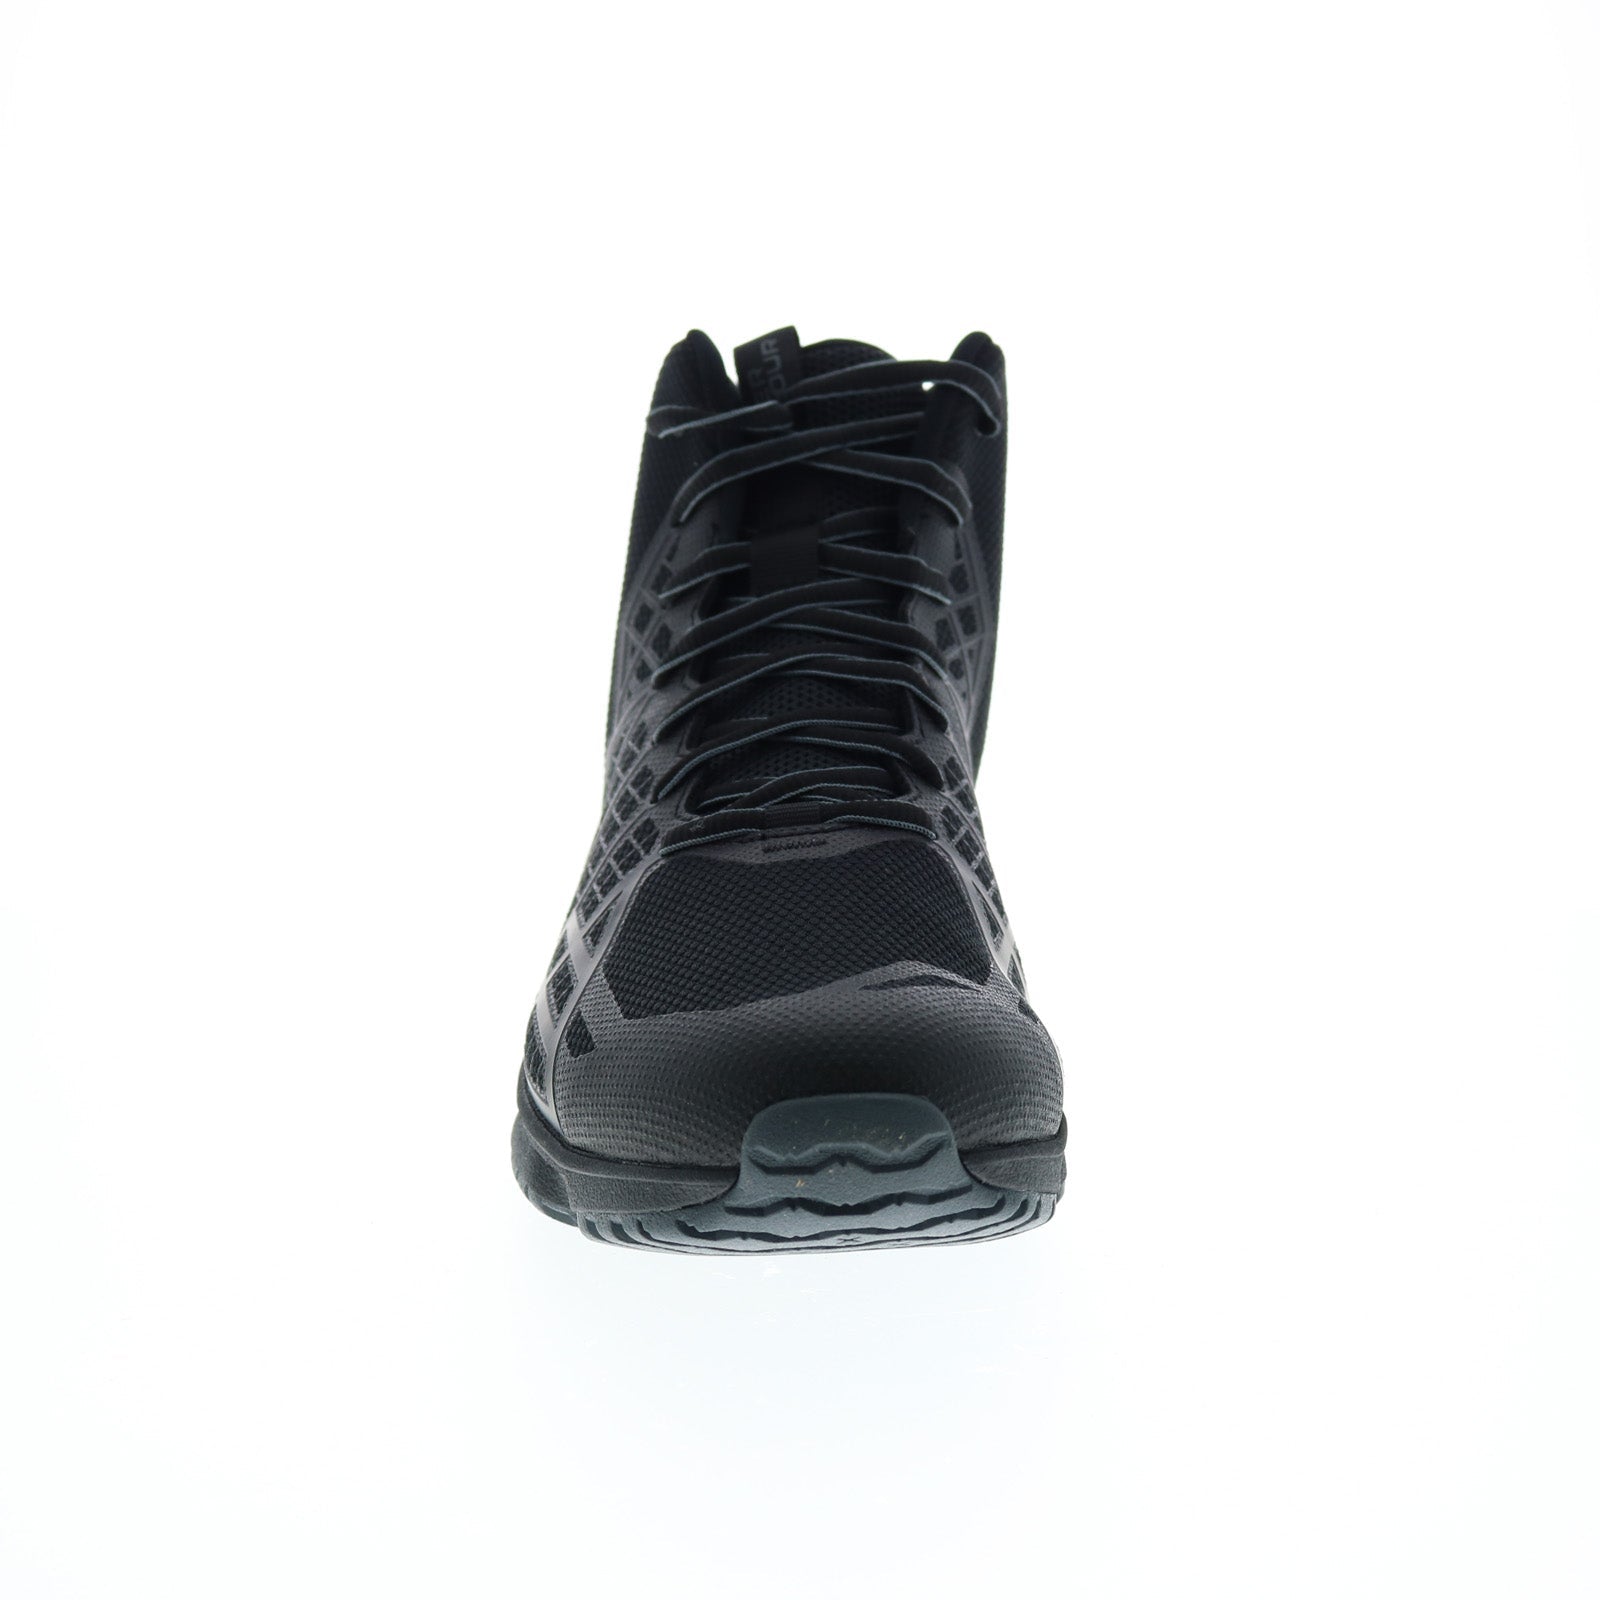 Under Armour Micro G Strikefast Tactical Shoes Leather/Synthetic